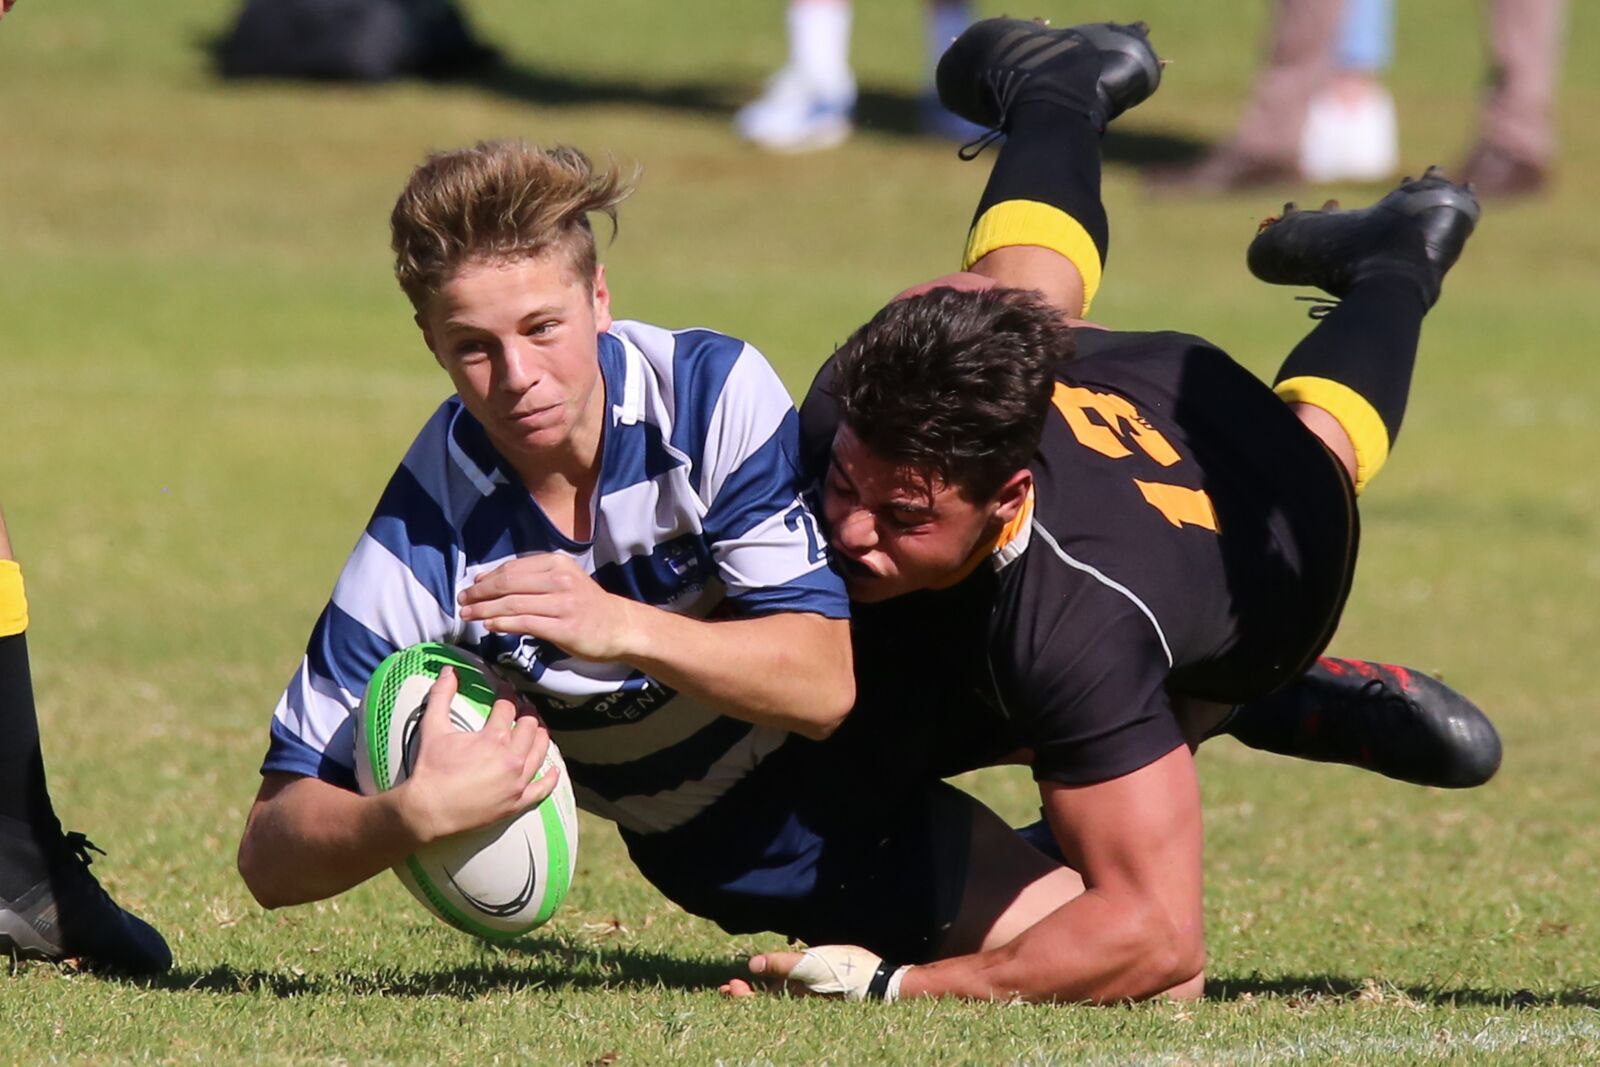 150-600mm F5-6.3 DG OS HSM | Sports 014 sample photo. Rugby, tackle, sport photography